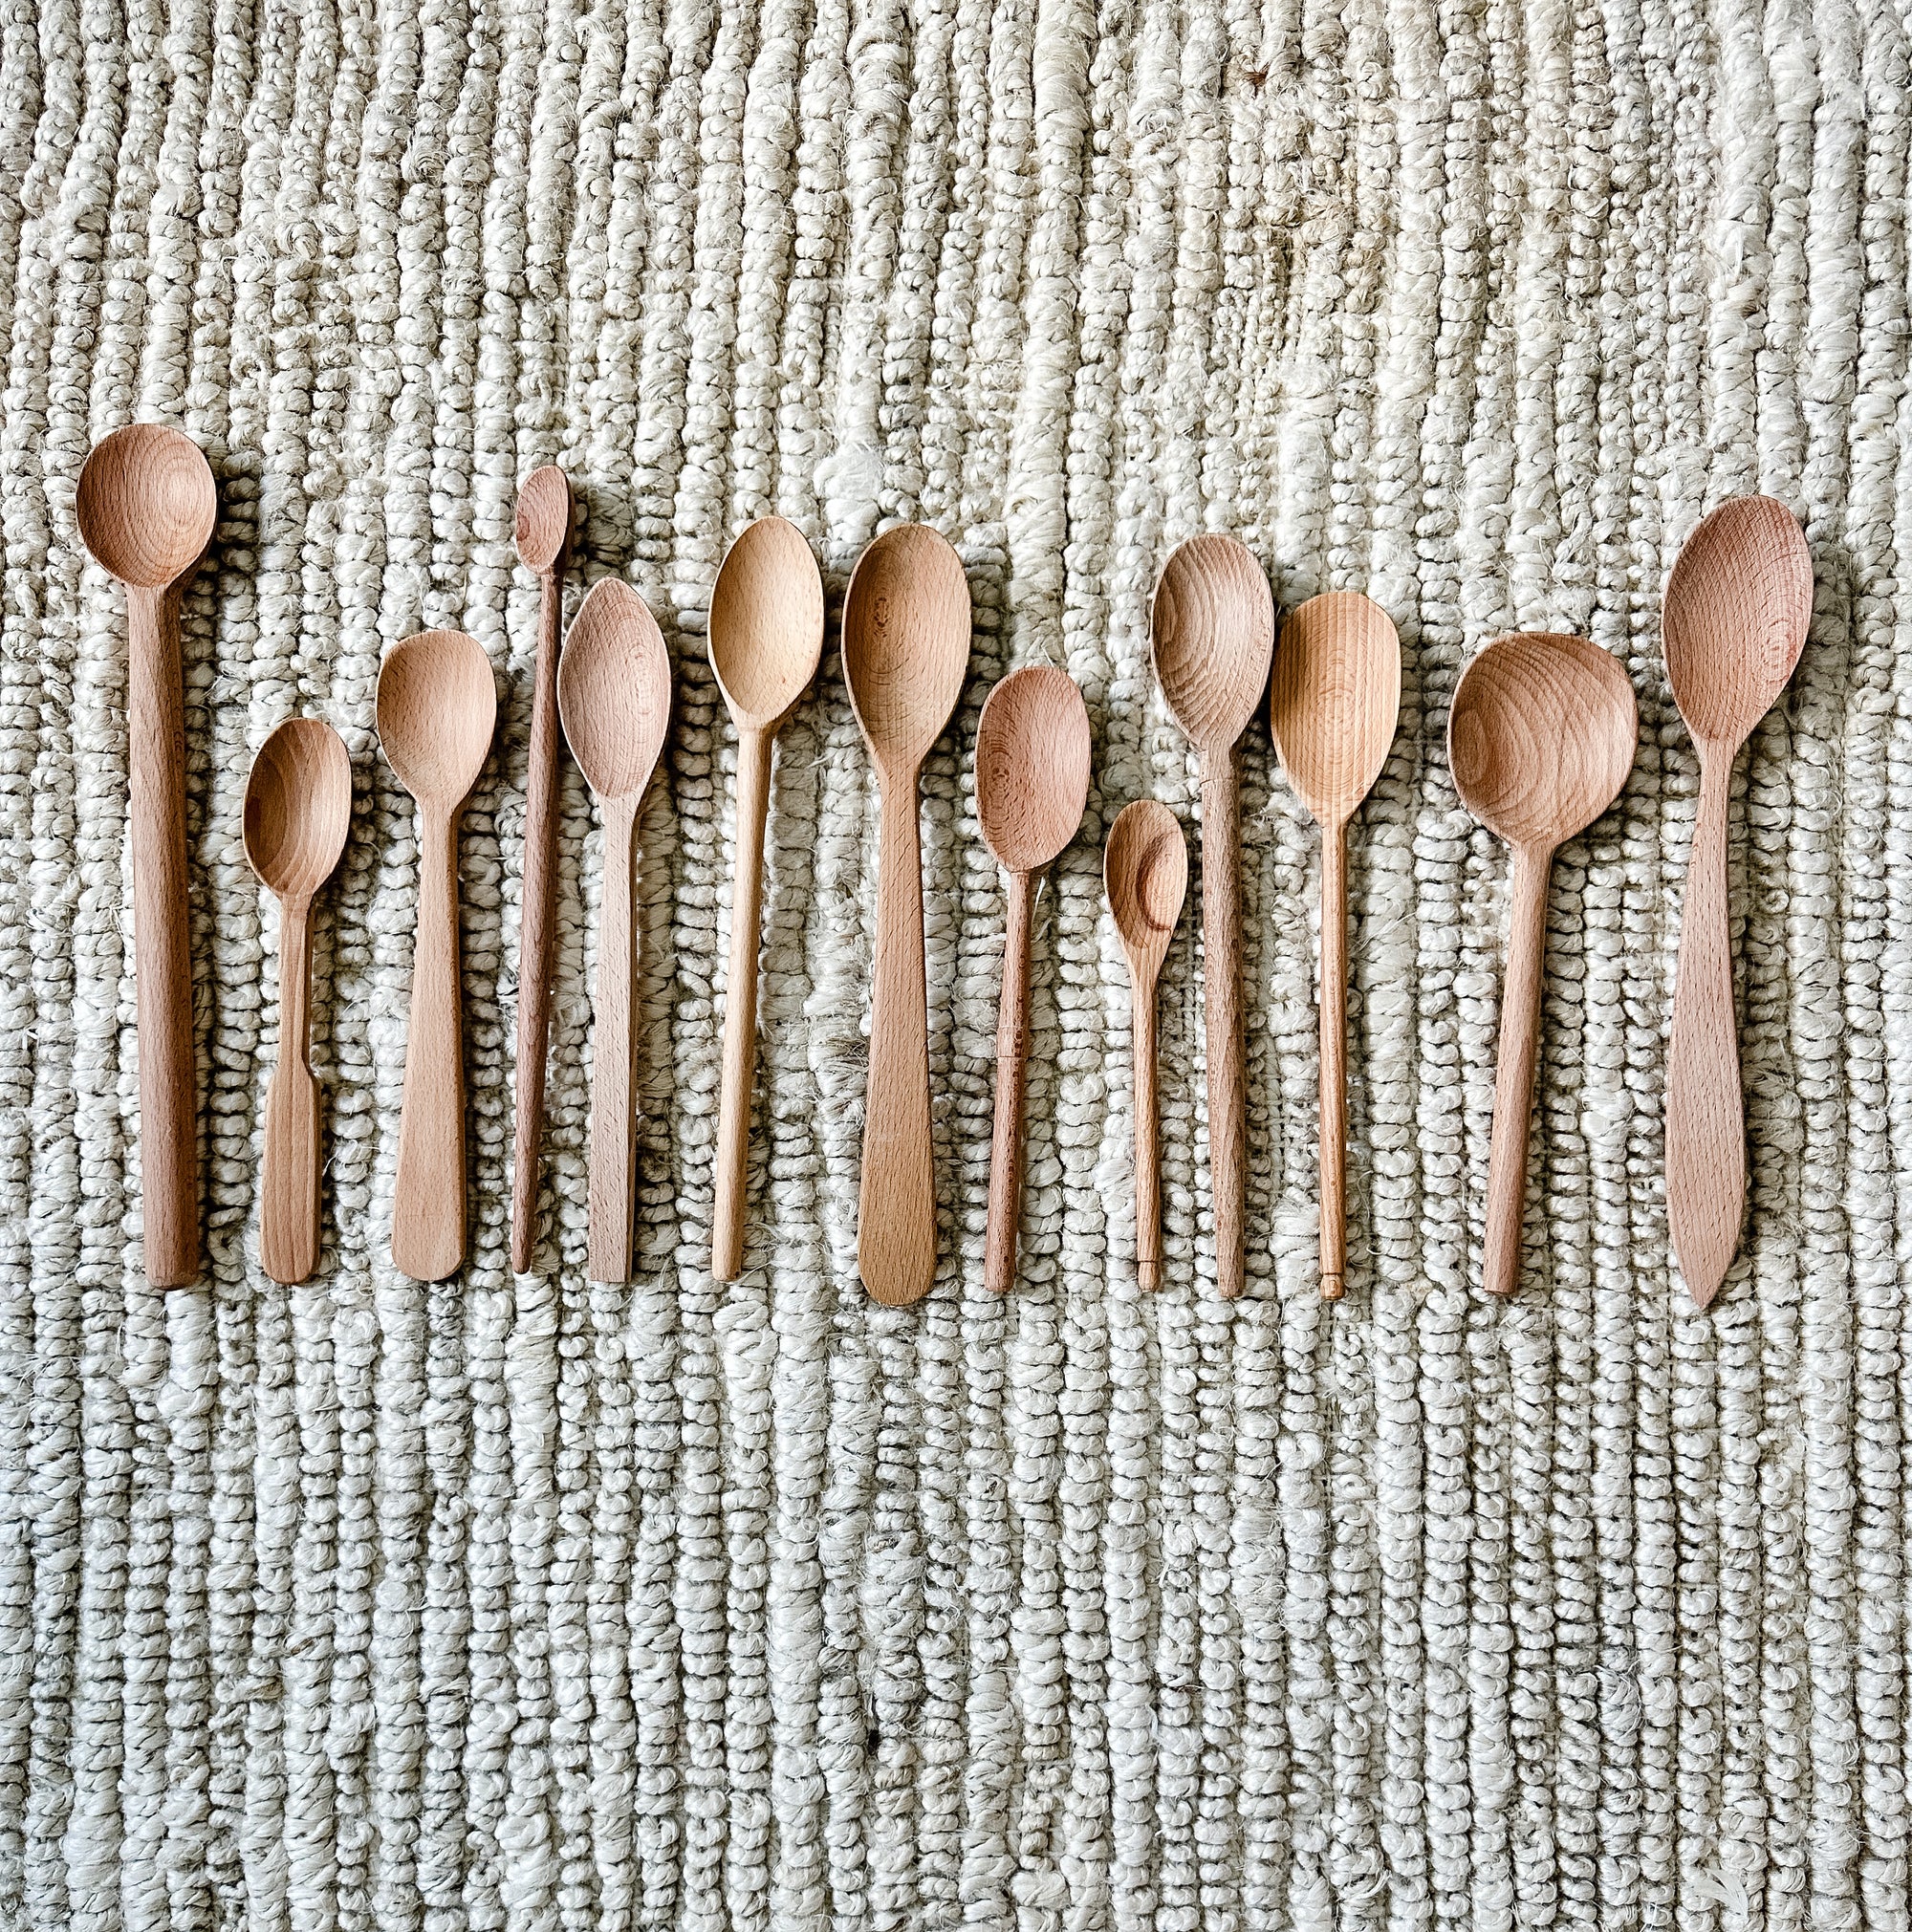 Wooden Spoons - Set of 13